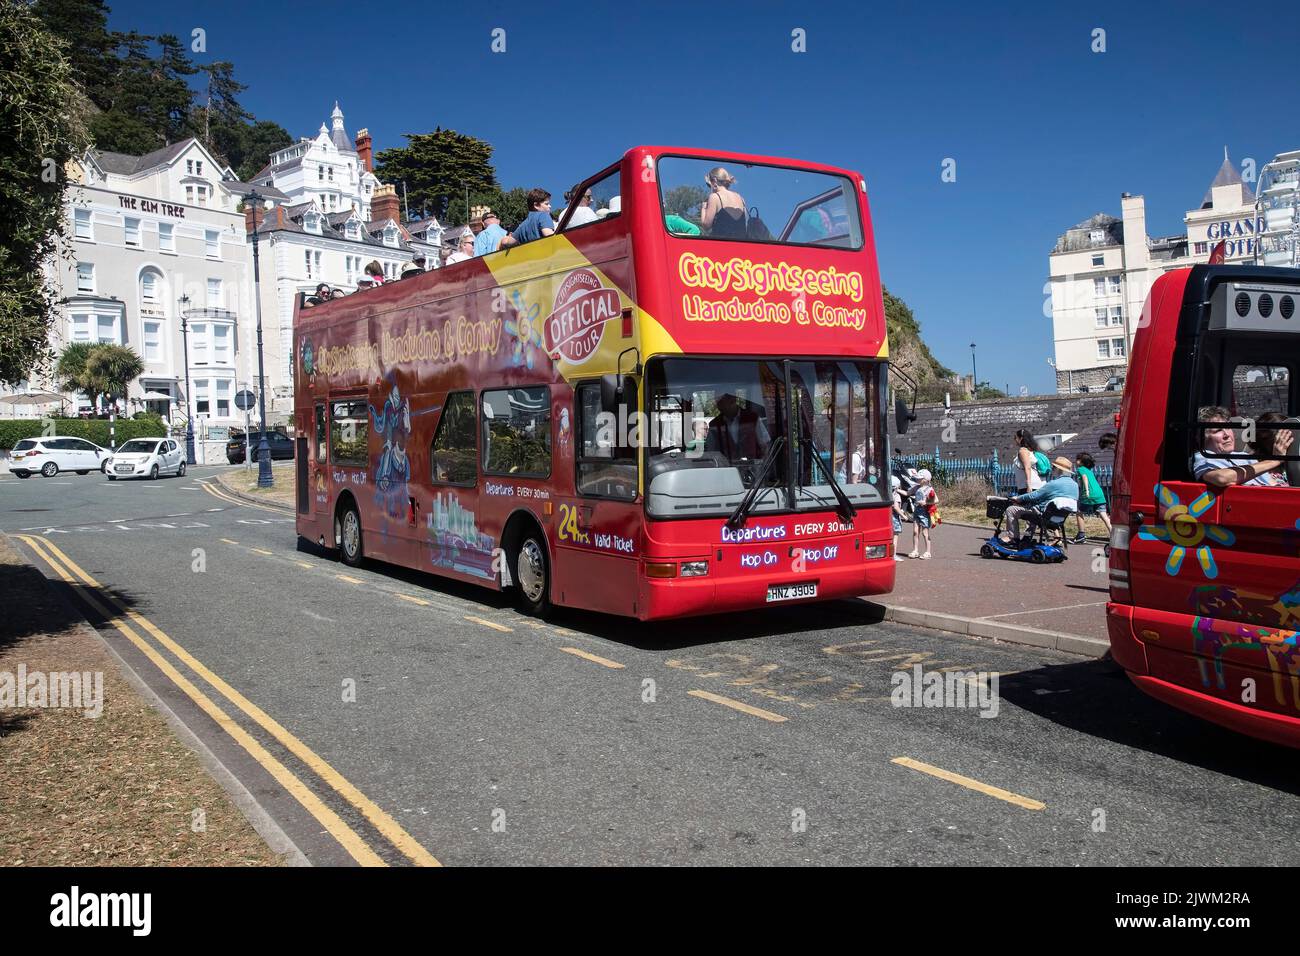 Llandudno sightseeing buses adjacent to the pier offering hop on-hop off bus tours of the town and surrounds for visitors and tourists Stock Photo